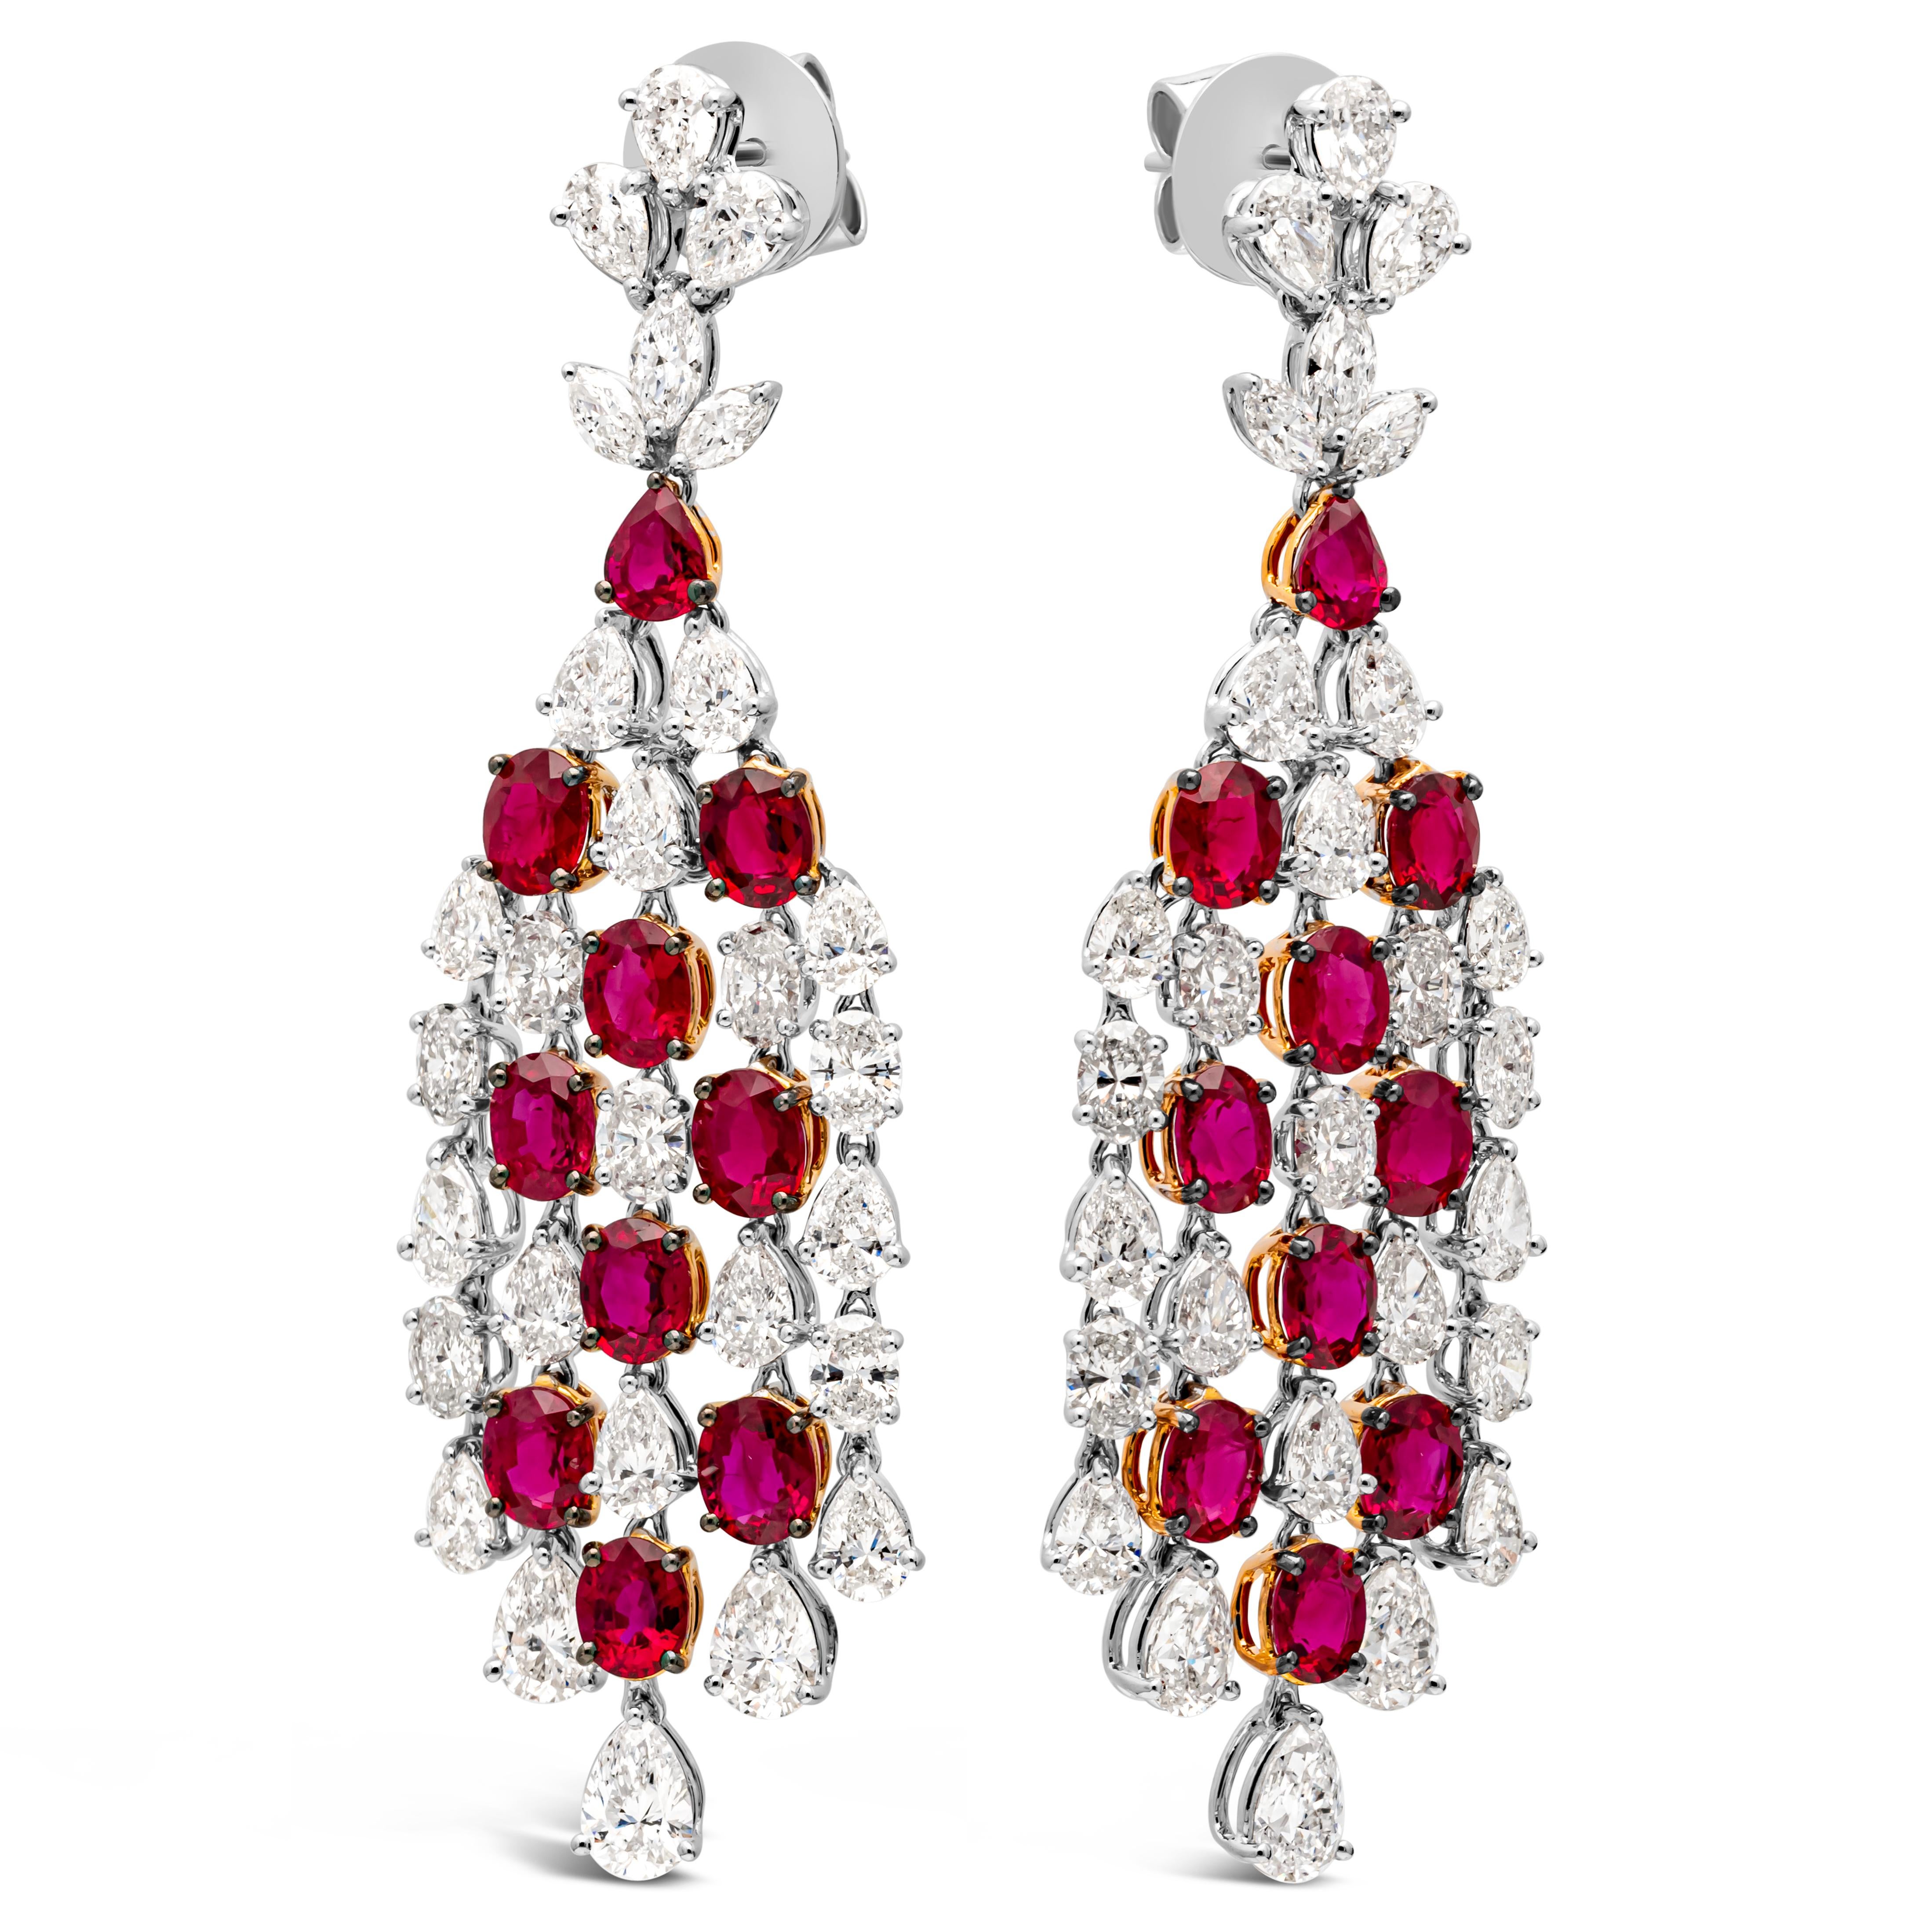 An exquisite pair of chandelier earrings showcasing 9.00 carats total of 18 oval cut and 1 pear shape color-rich rubies, set in an elegant dangling waterfall design with 9.10 carats total of brilliant oval, pear and marquise cut diamonds. Perfectly